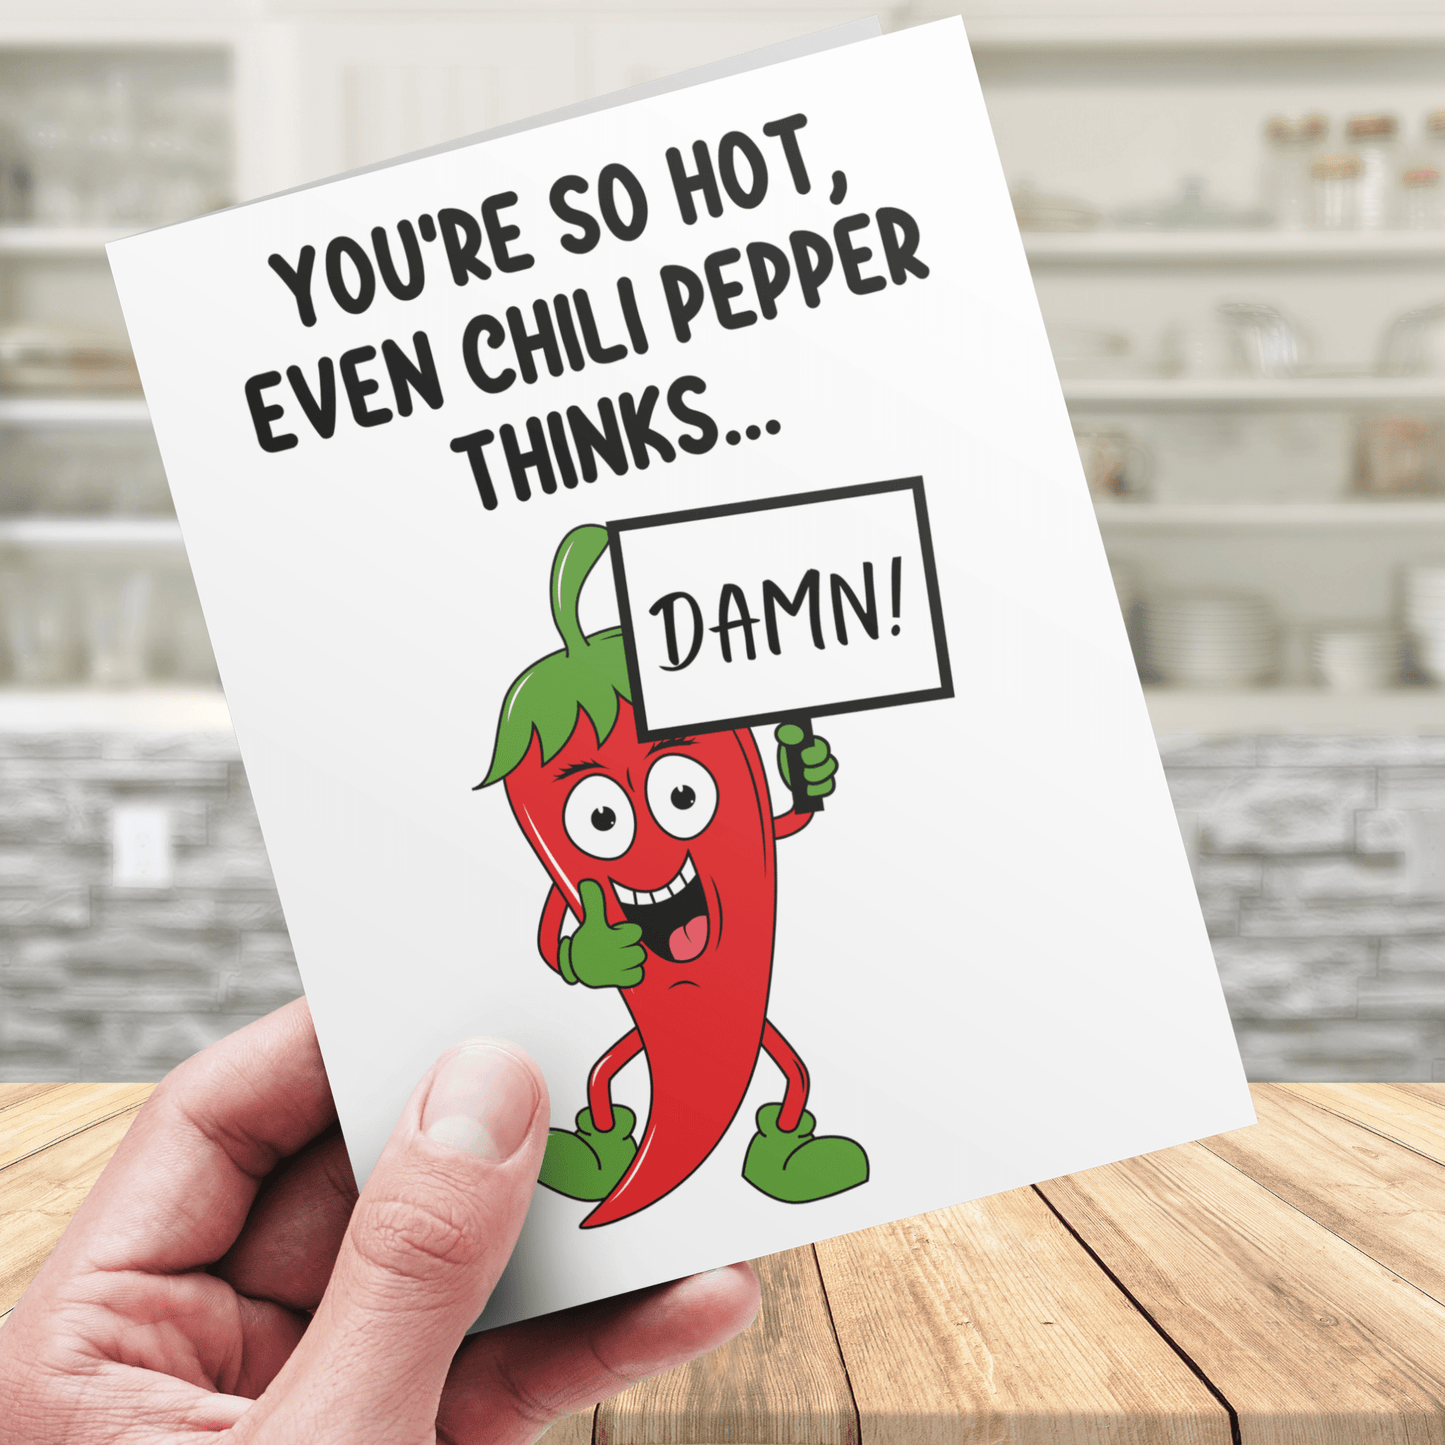 Couple Digital Greeting Card: You're So Hot, Even Chili Pepper Thinks...Damn!